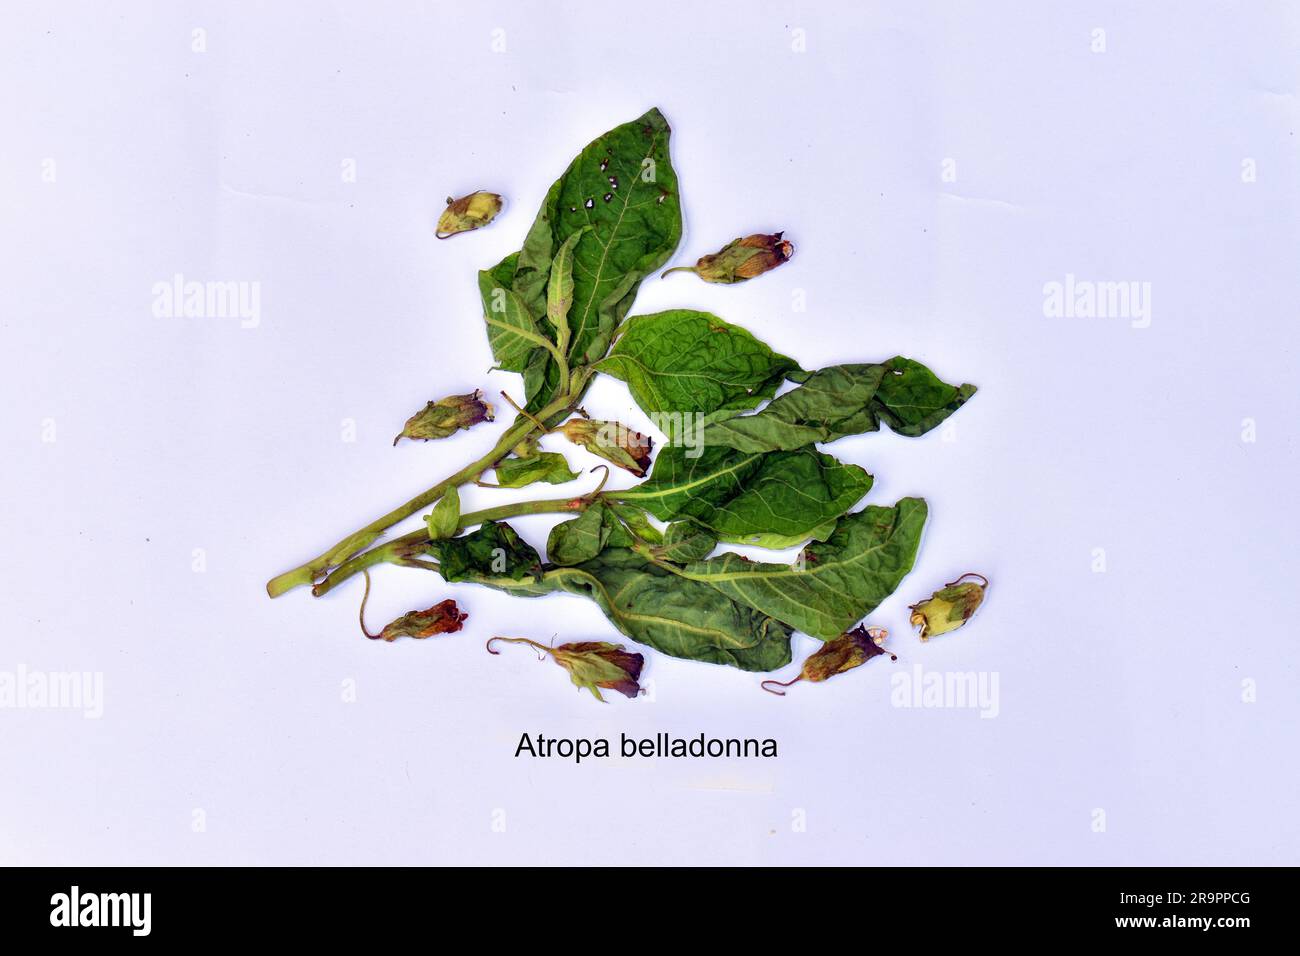 Dried leaves and flowers of belladonna (Atropa belladonna), a medicinal but highly toxic plant. Stock Photo